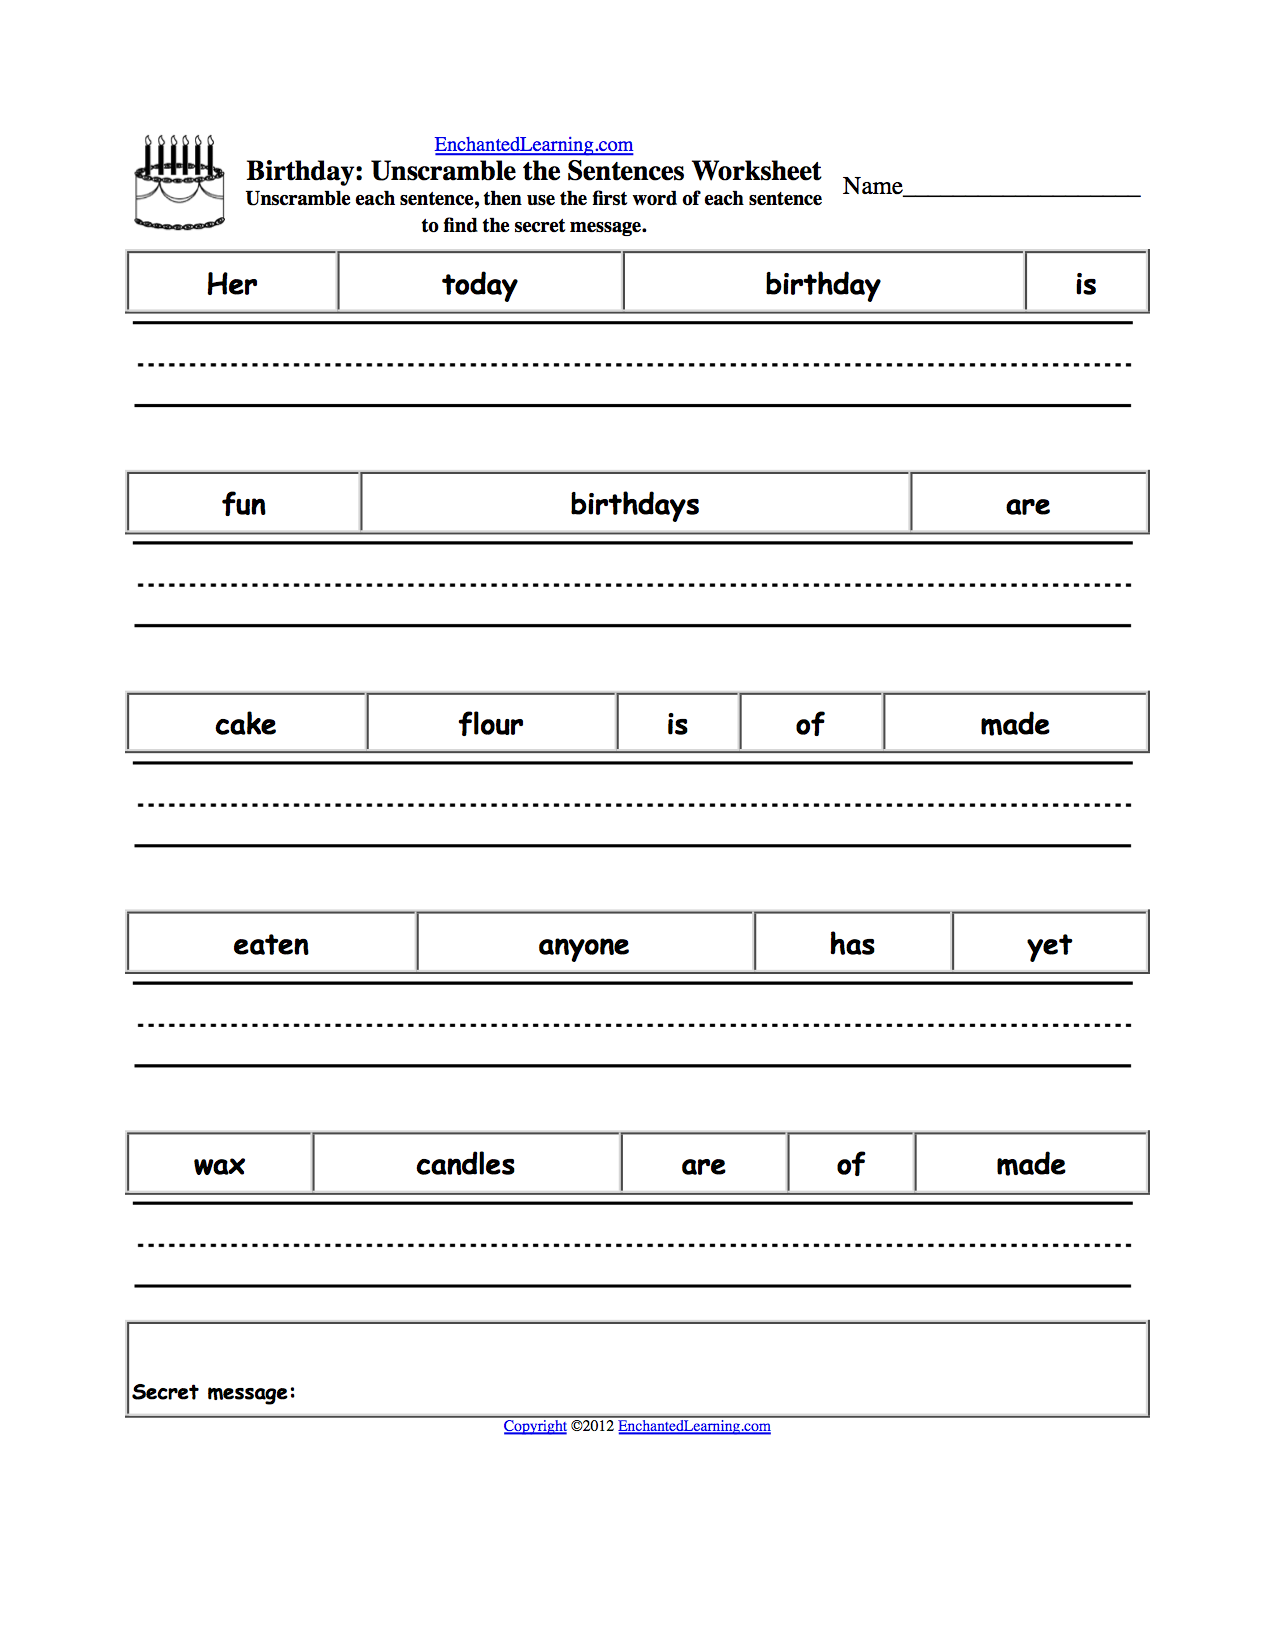 15-best-images-of-spanish-sentences-worksheets-spanish-words-and